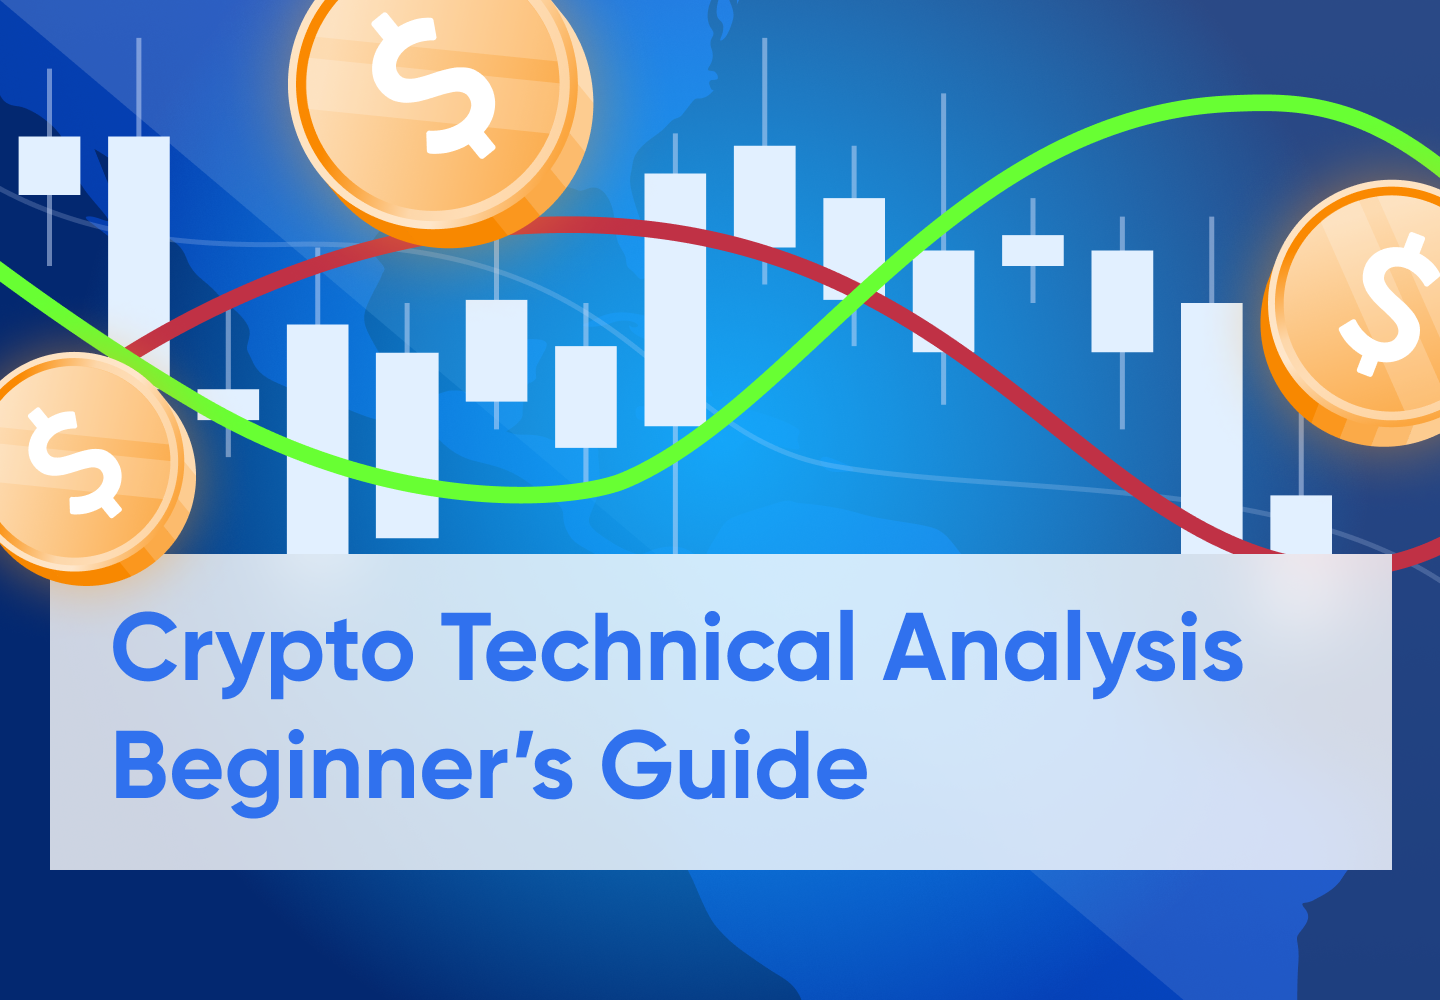 What Is Crypto Technical Analysis?